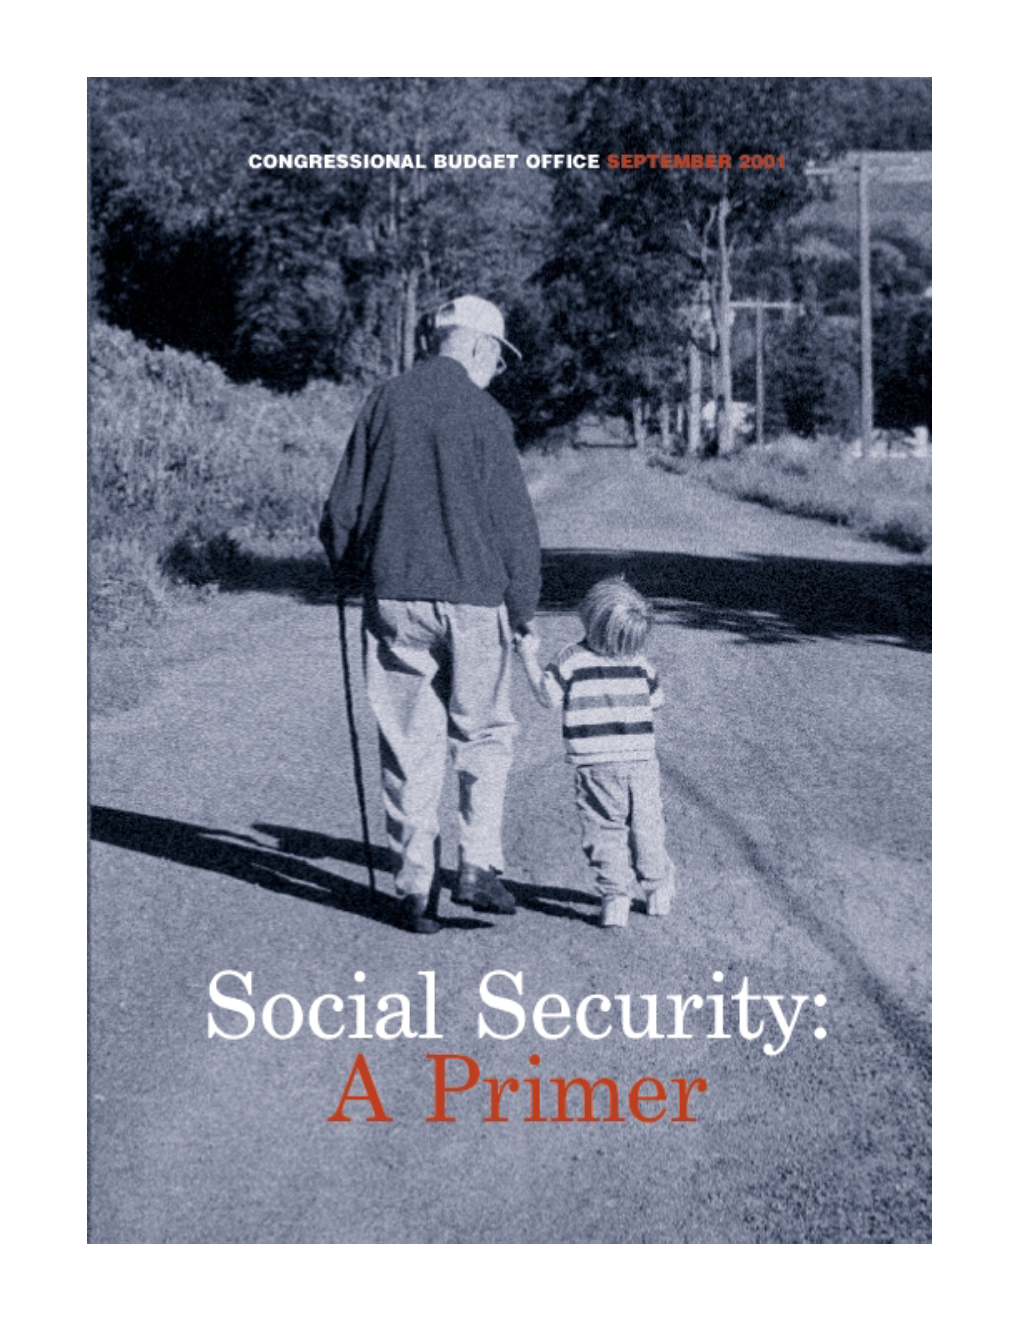 Social Security Describes the Ele- Ments of the Program That Are Most Relevant to the Current Debate About Social Tsecurity’S Future